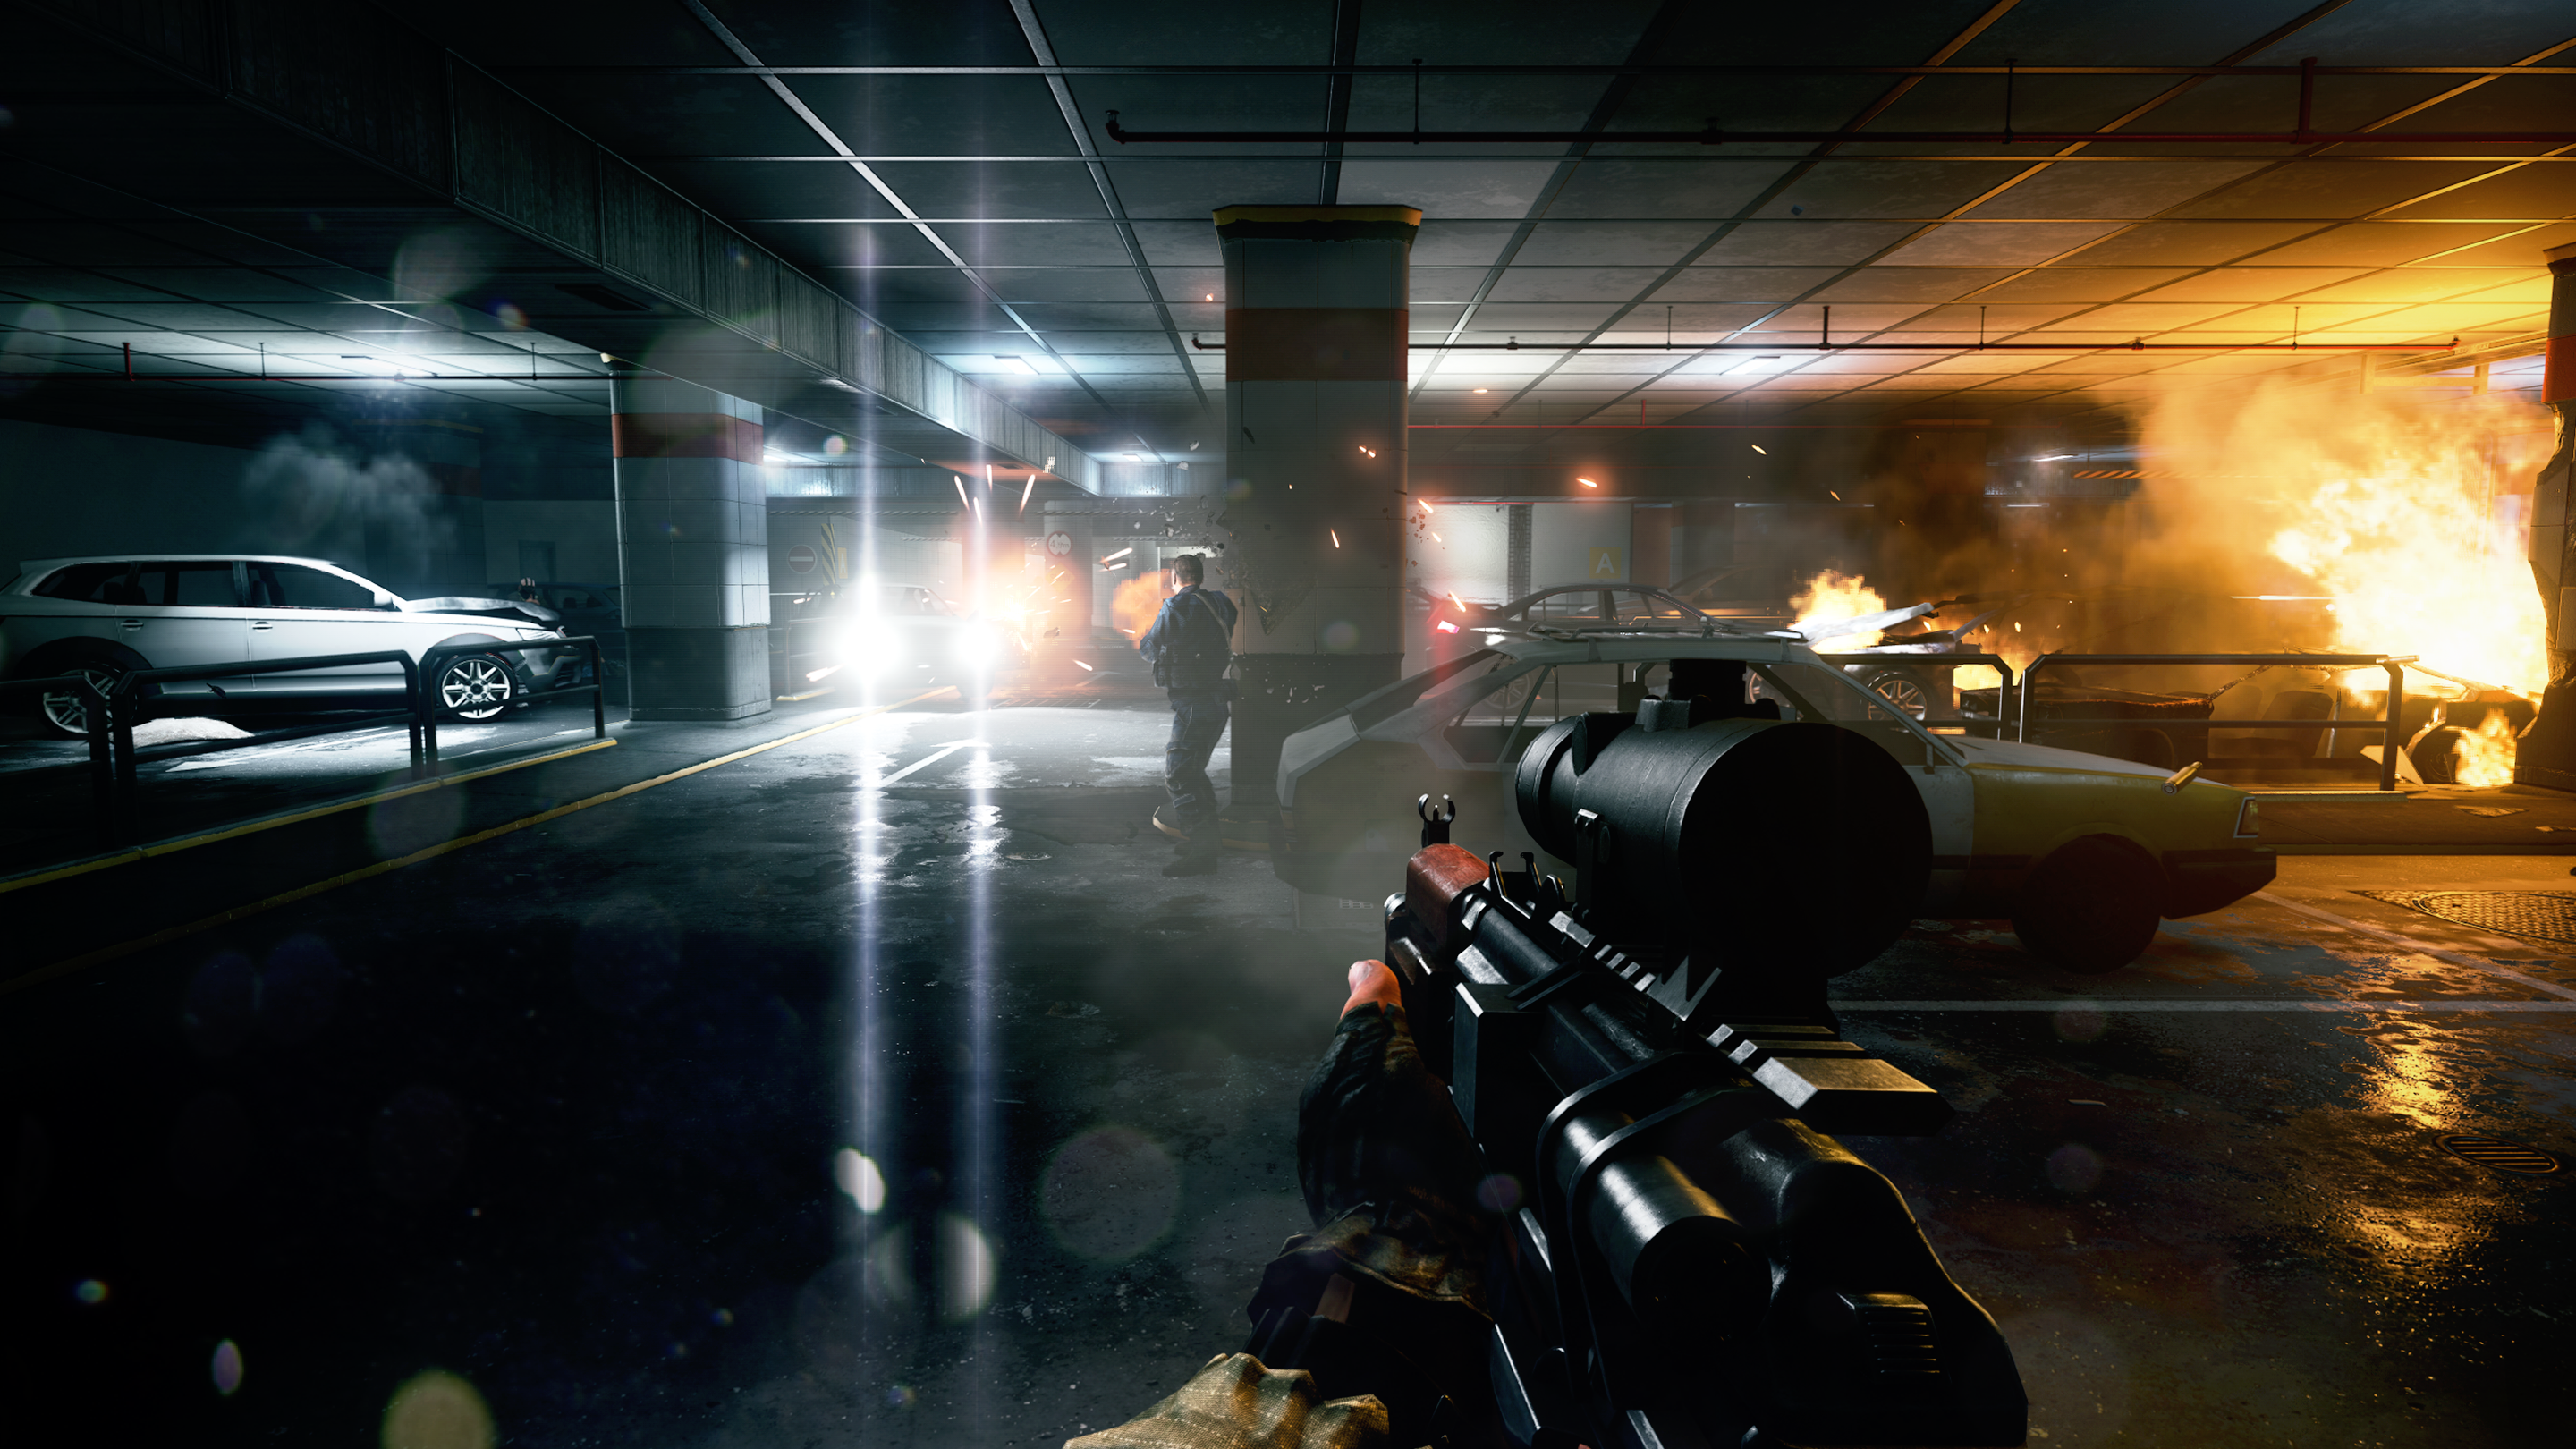 battlefield 3 for pc